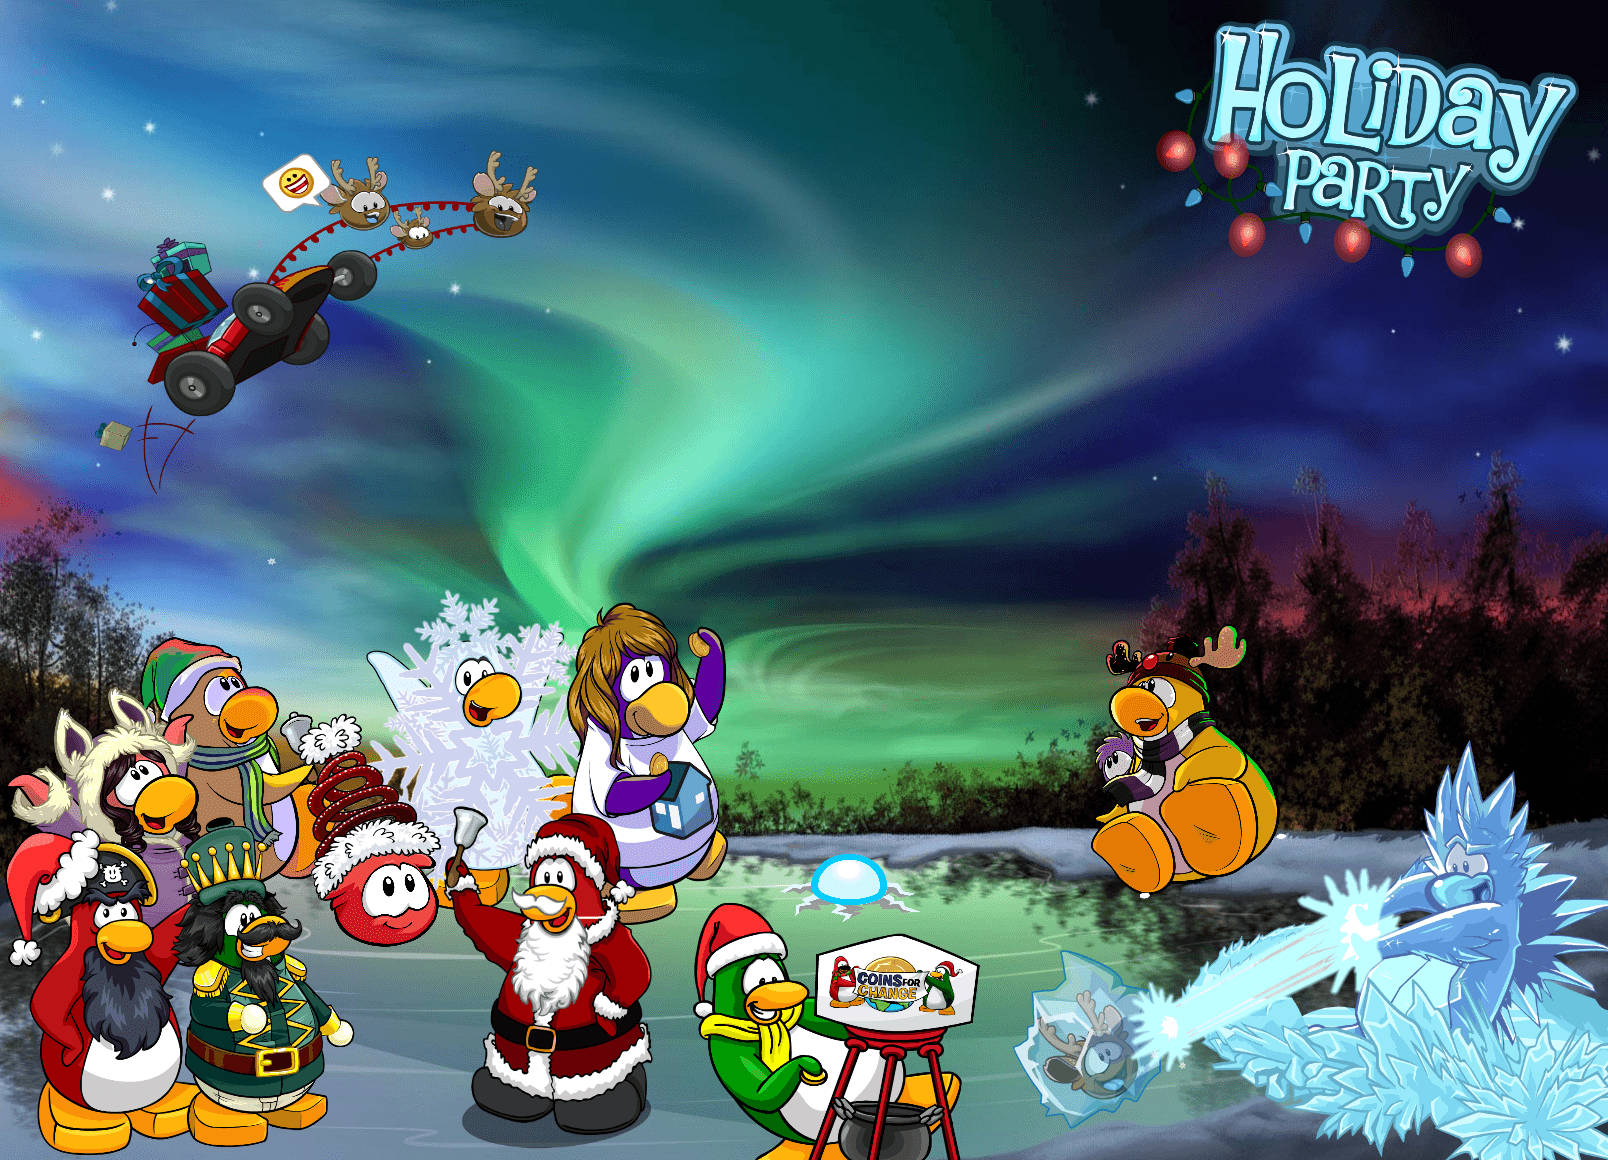 Club Penguin Christmas Party Flyer Background